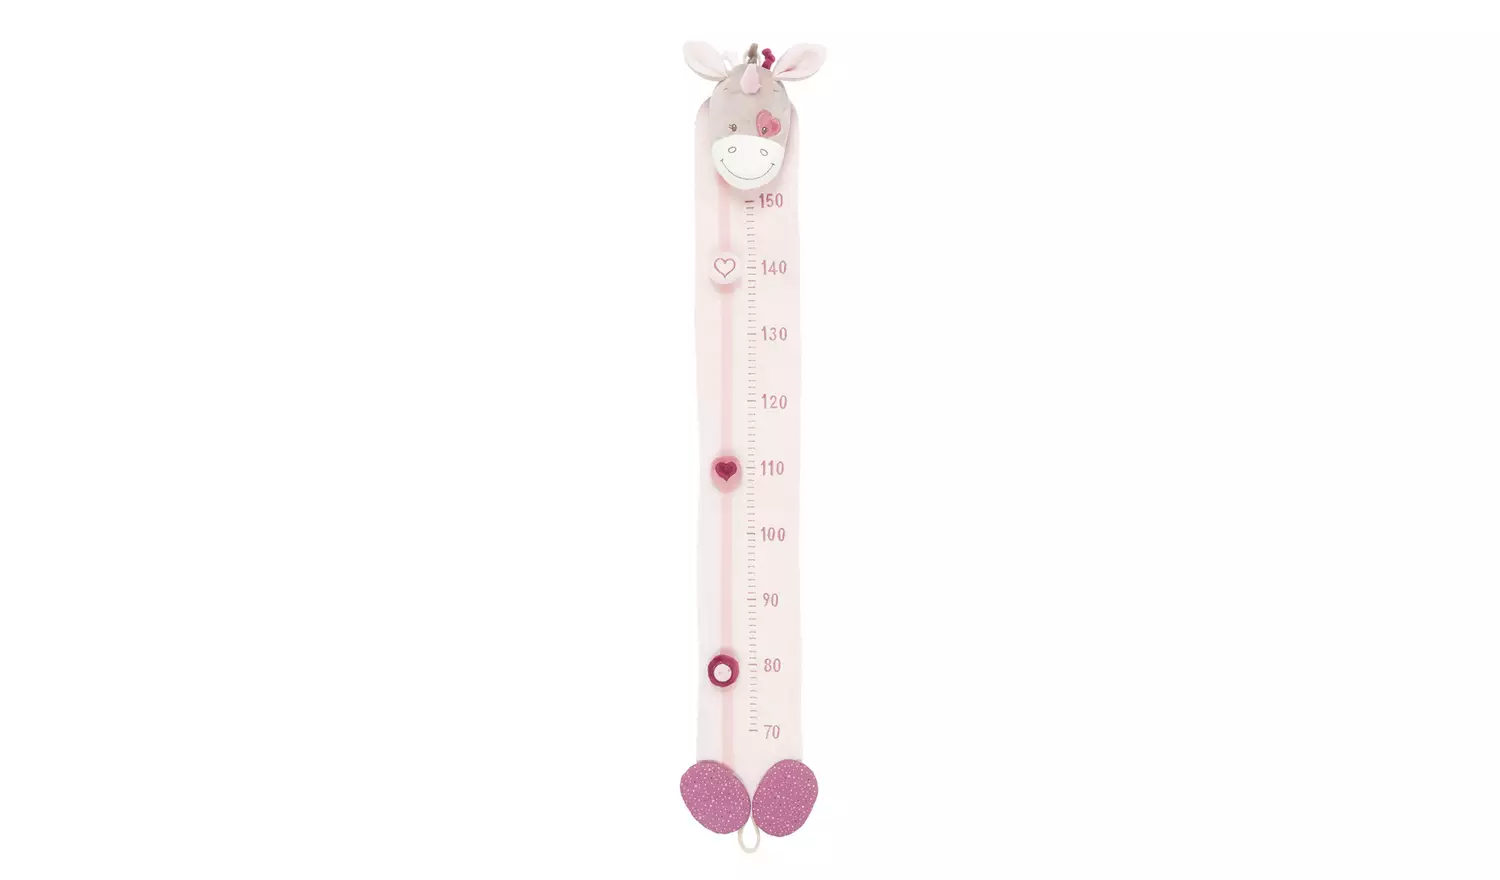 Nattou Fanny the Deer Growth Chart